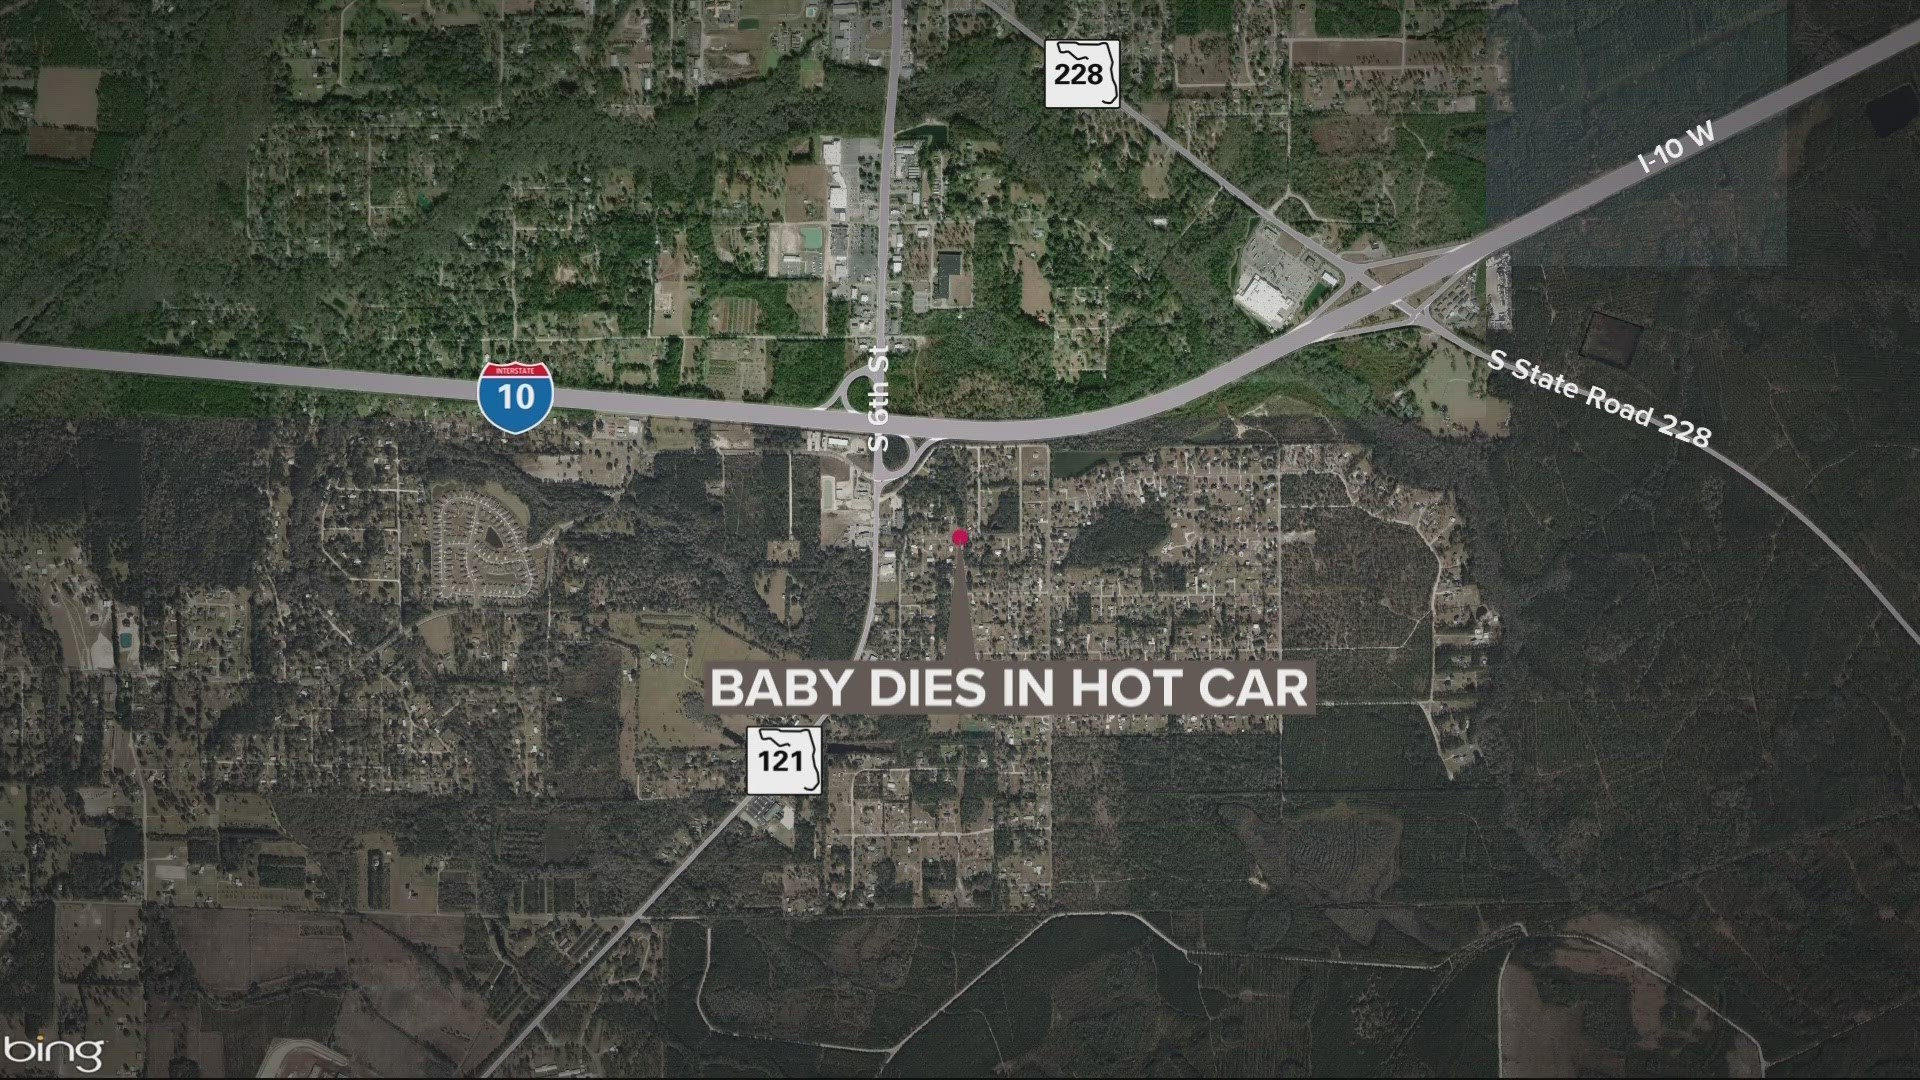 Deputies say the toddler was inadvertently left in a vehicle at an Estates Street residence. She was found unresponsive and later died.